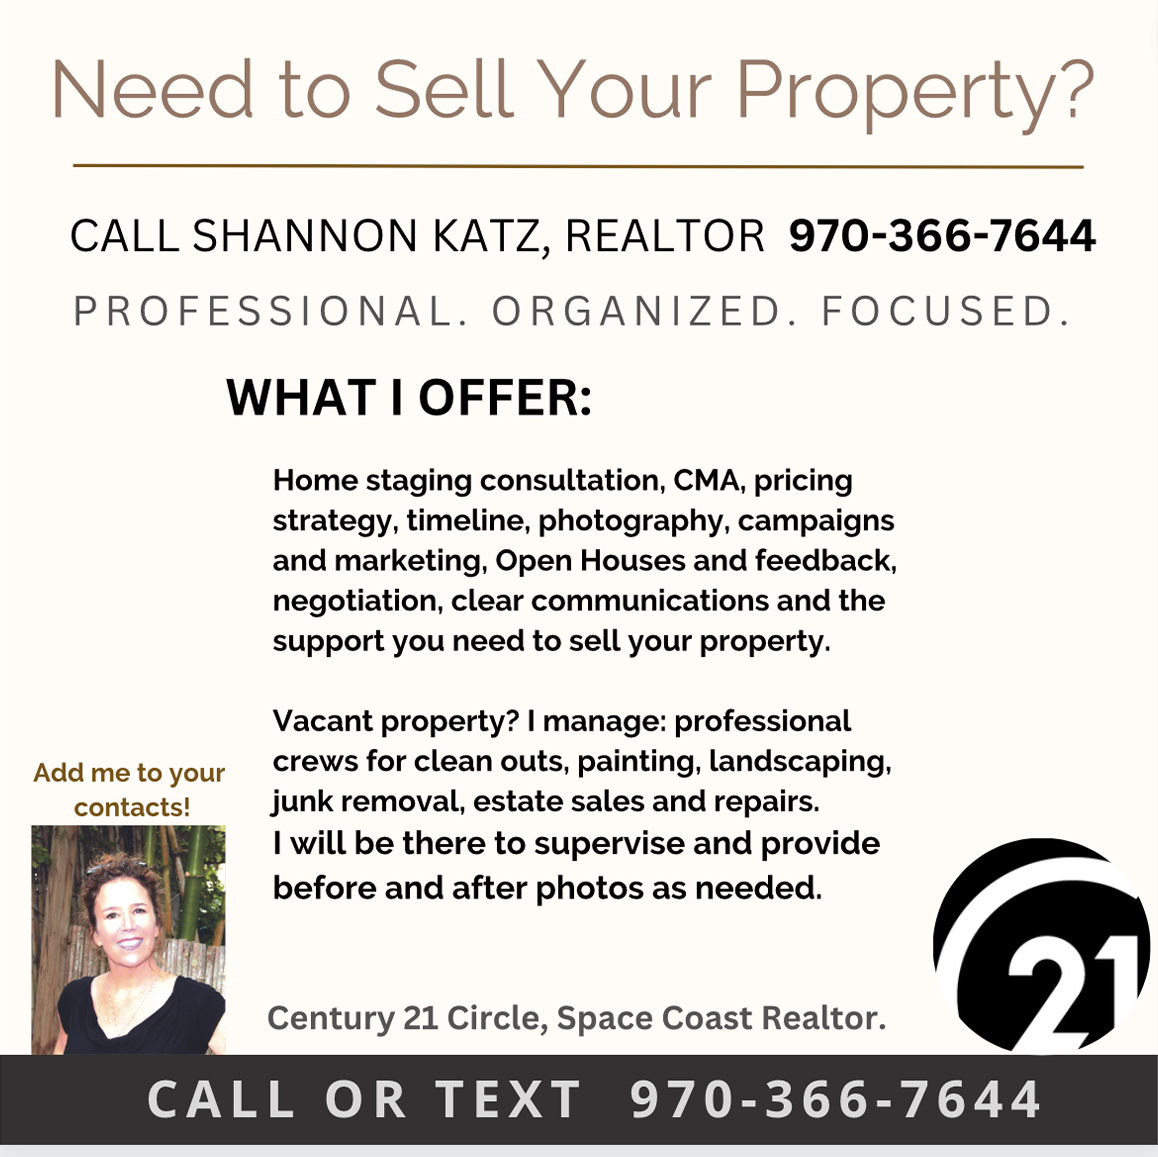 spacecoast realtor, sell my property, staging, photography